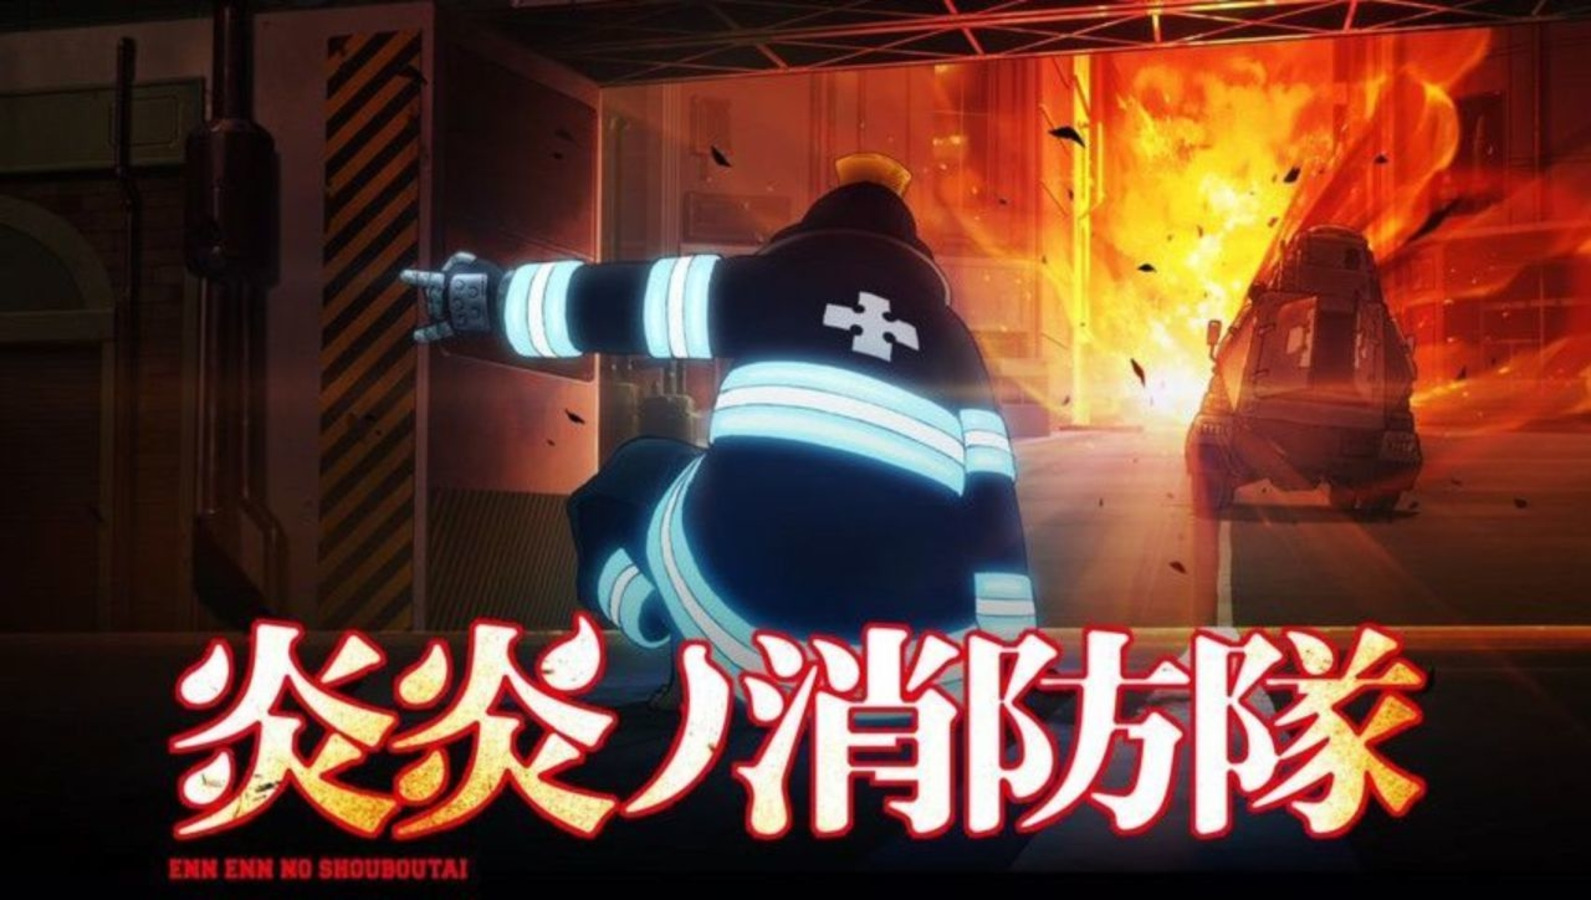 Anime Fire Force